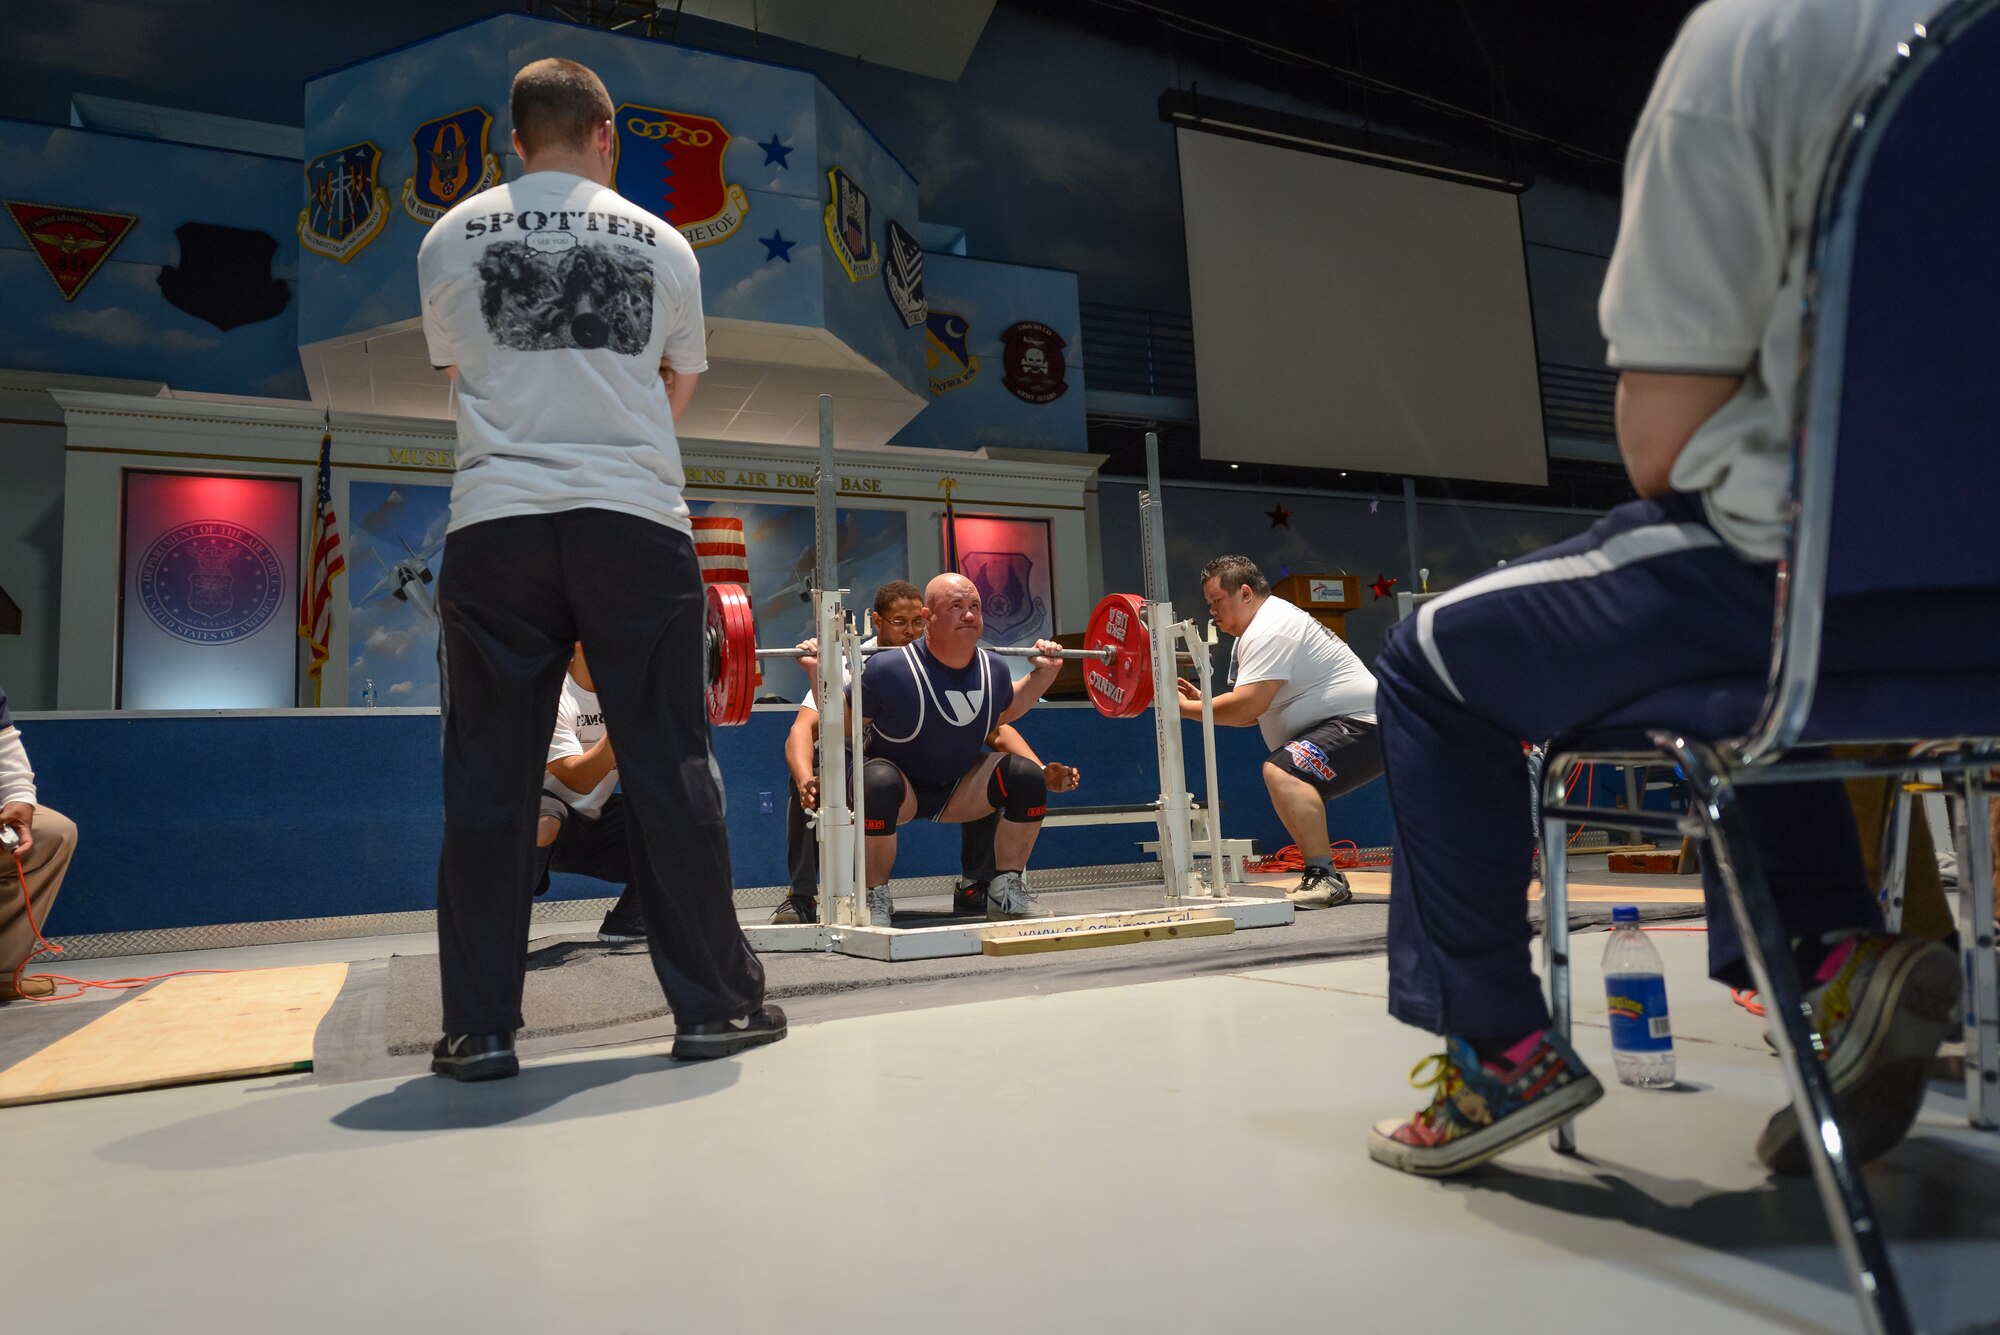 U.S. Air Force Tech. Sgt. Michael Lloyd of the 165th Airlift Wing, Georgia Air National Guard attempts a squat, Jan. 25, 2014, at the Museum of Aviation in Warner Robins, Ga. Lloyd broke four U.S.A. Powerlifting Georgia state records at the 2014 Winter Classic and Single Ply Invitational. He set a record for squat, bench press, three event total (squat, bench press, deadlift), and bench press only for the Masters Division in his weight class at his first powerlifting competition. (U.S. Air National Guard photo by Master Sgt. Charles Delano/Released)